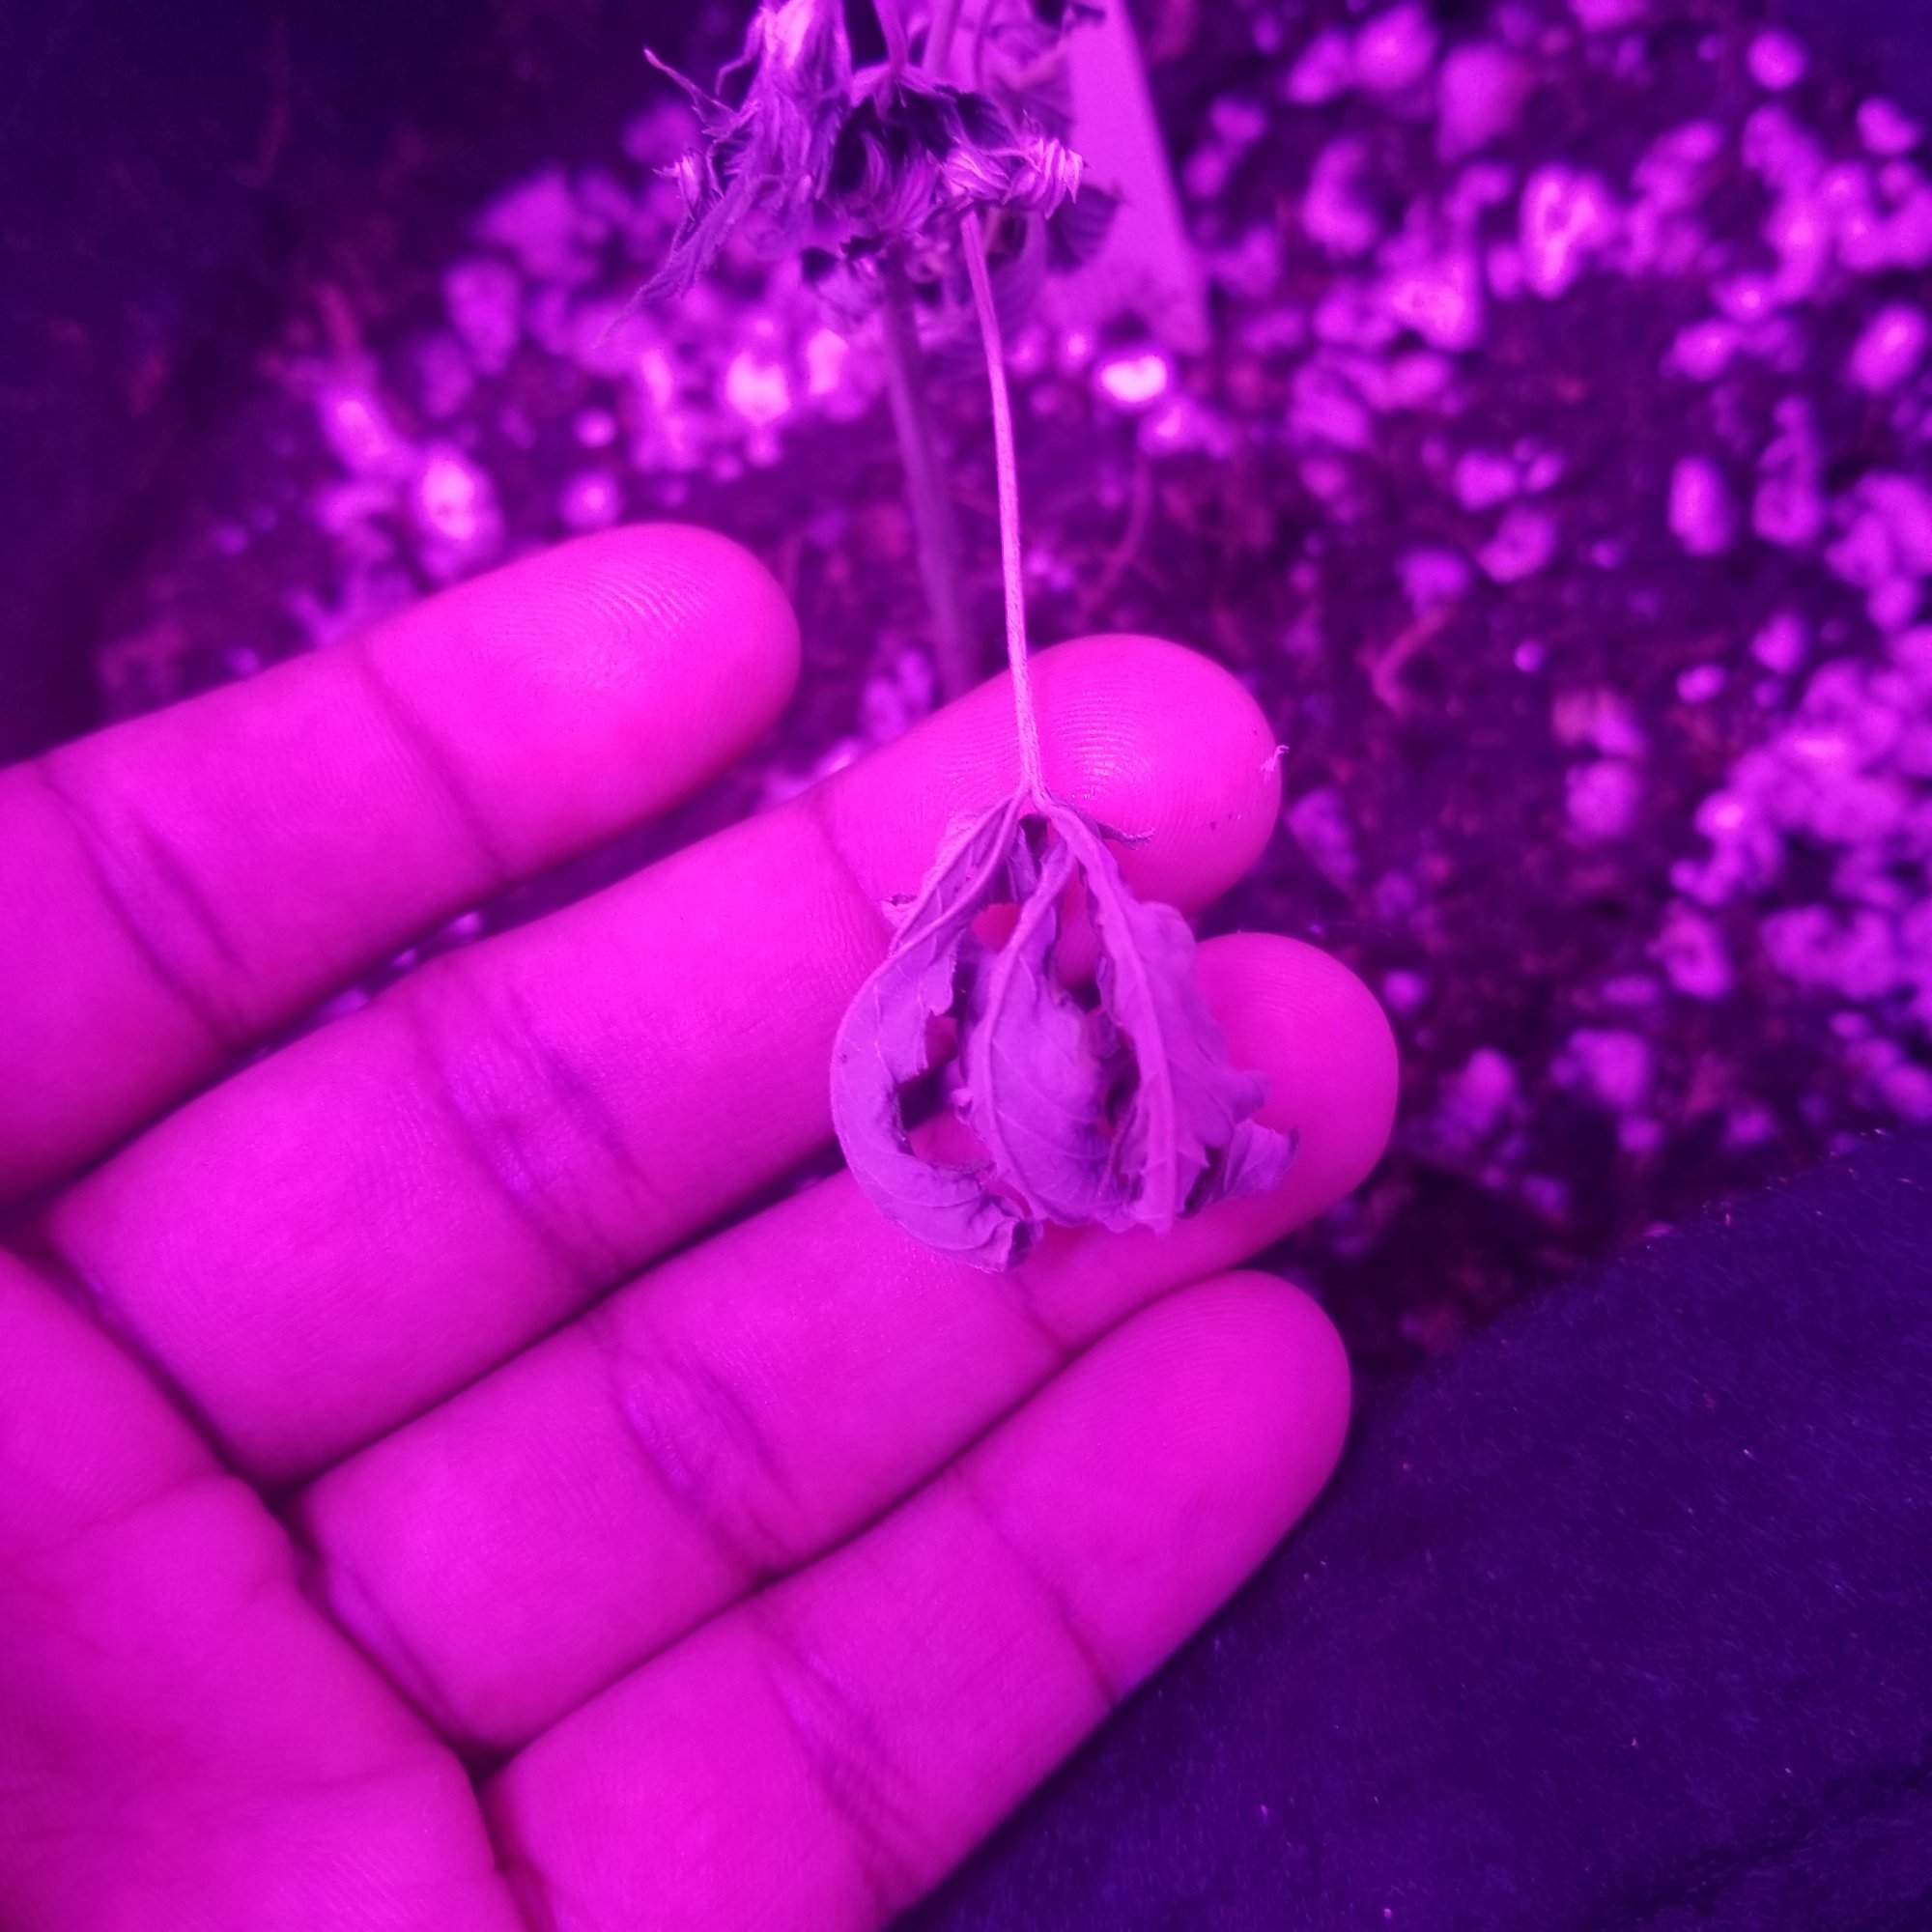 Are my clones dying please help